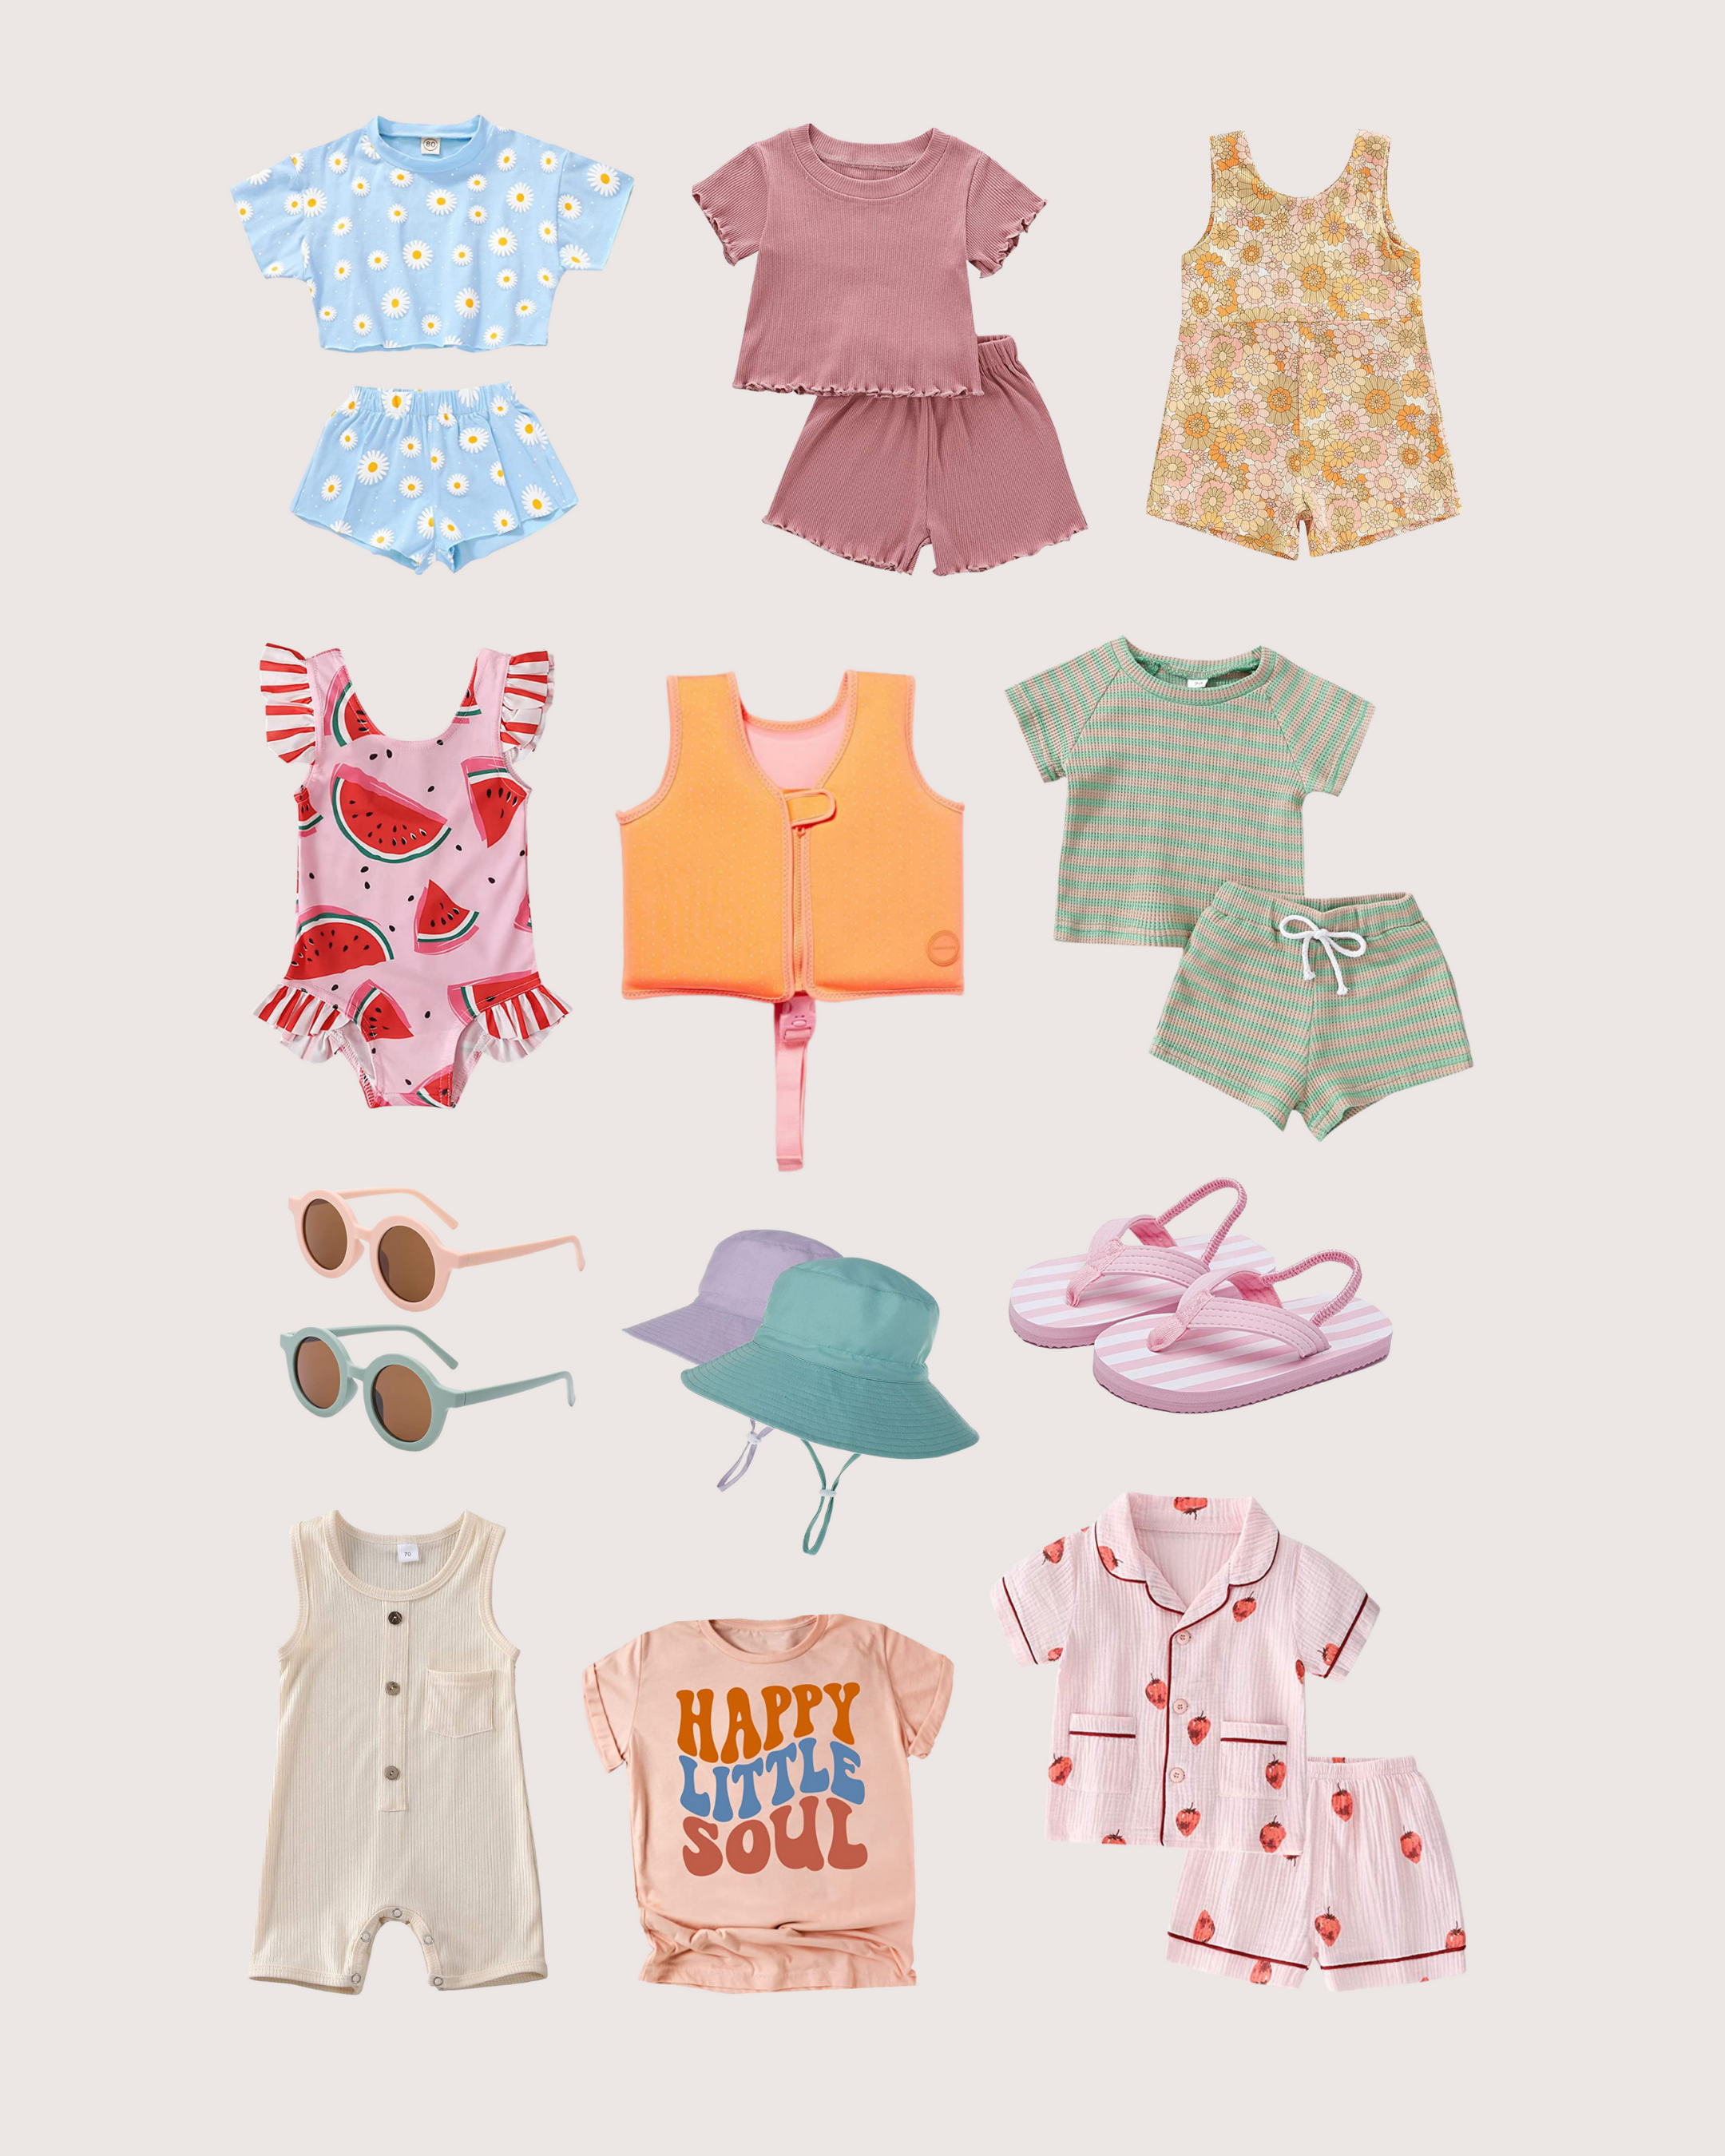 Toddler Summer Style Amazon Finds - bresheppard.com.png